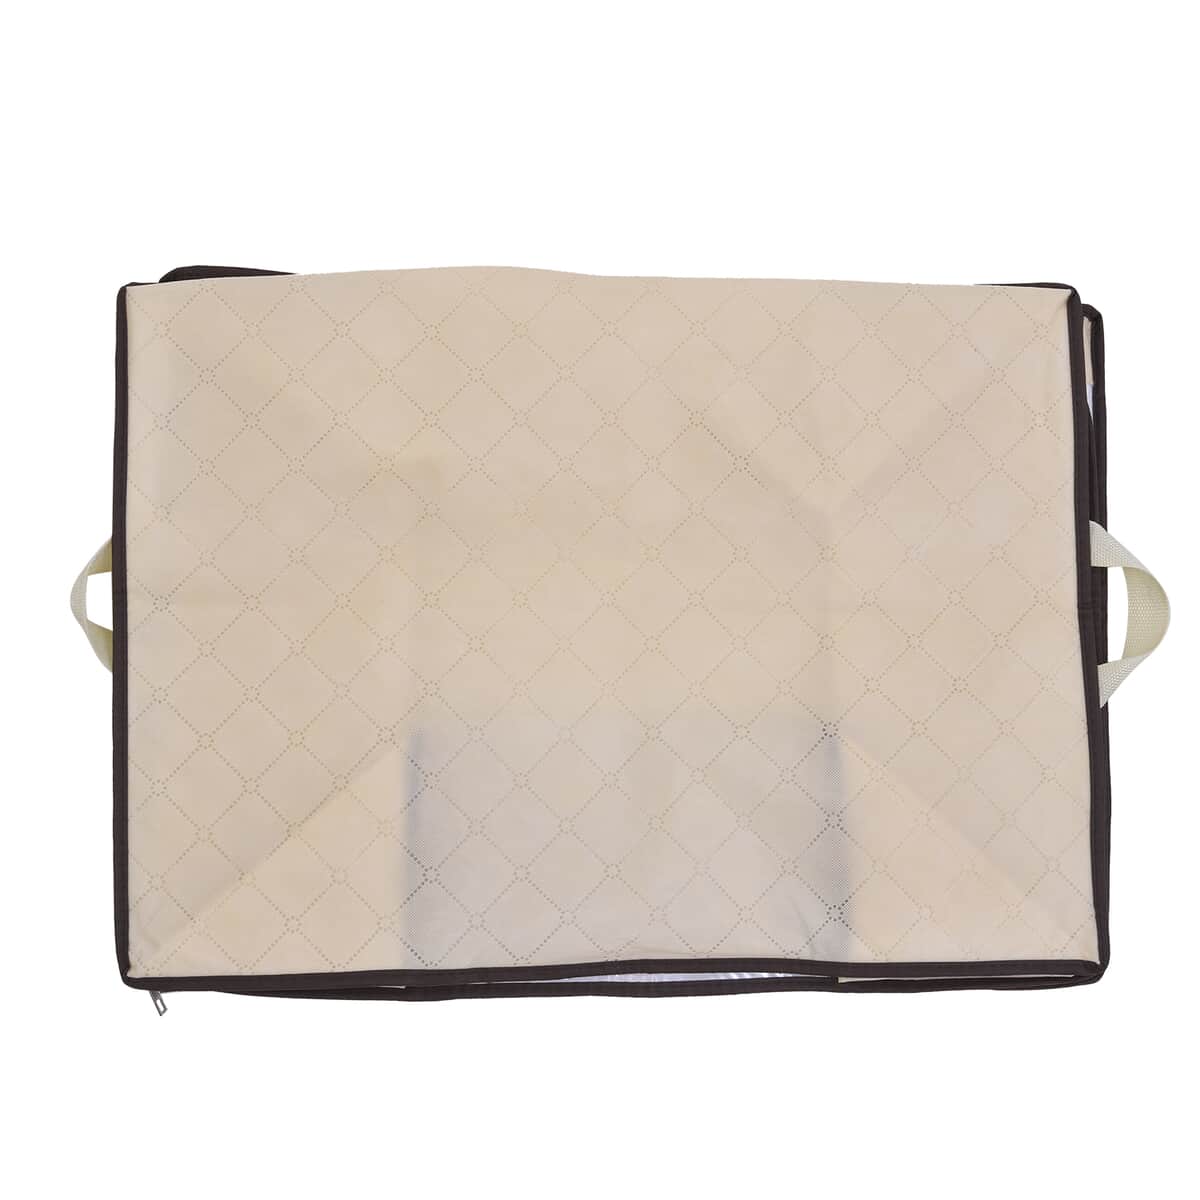 Set of 2 Beige Non Woven Fabric Storage Bag with Clear Window (23.6"x16.9"x13.7") image number 5